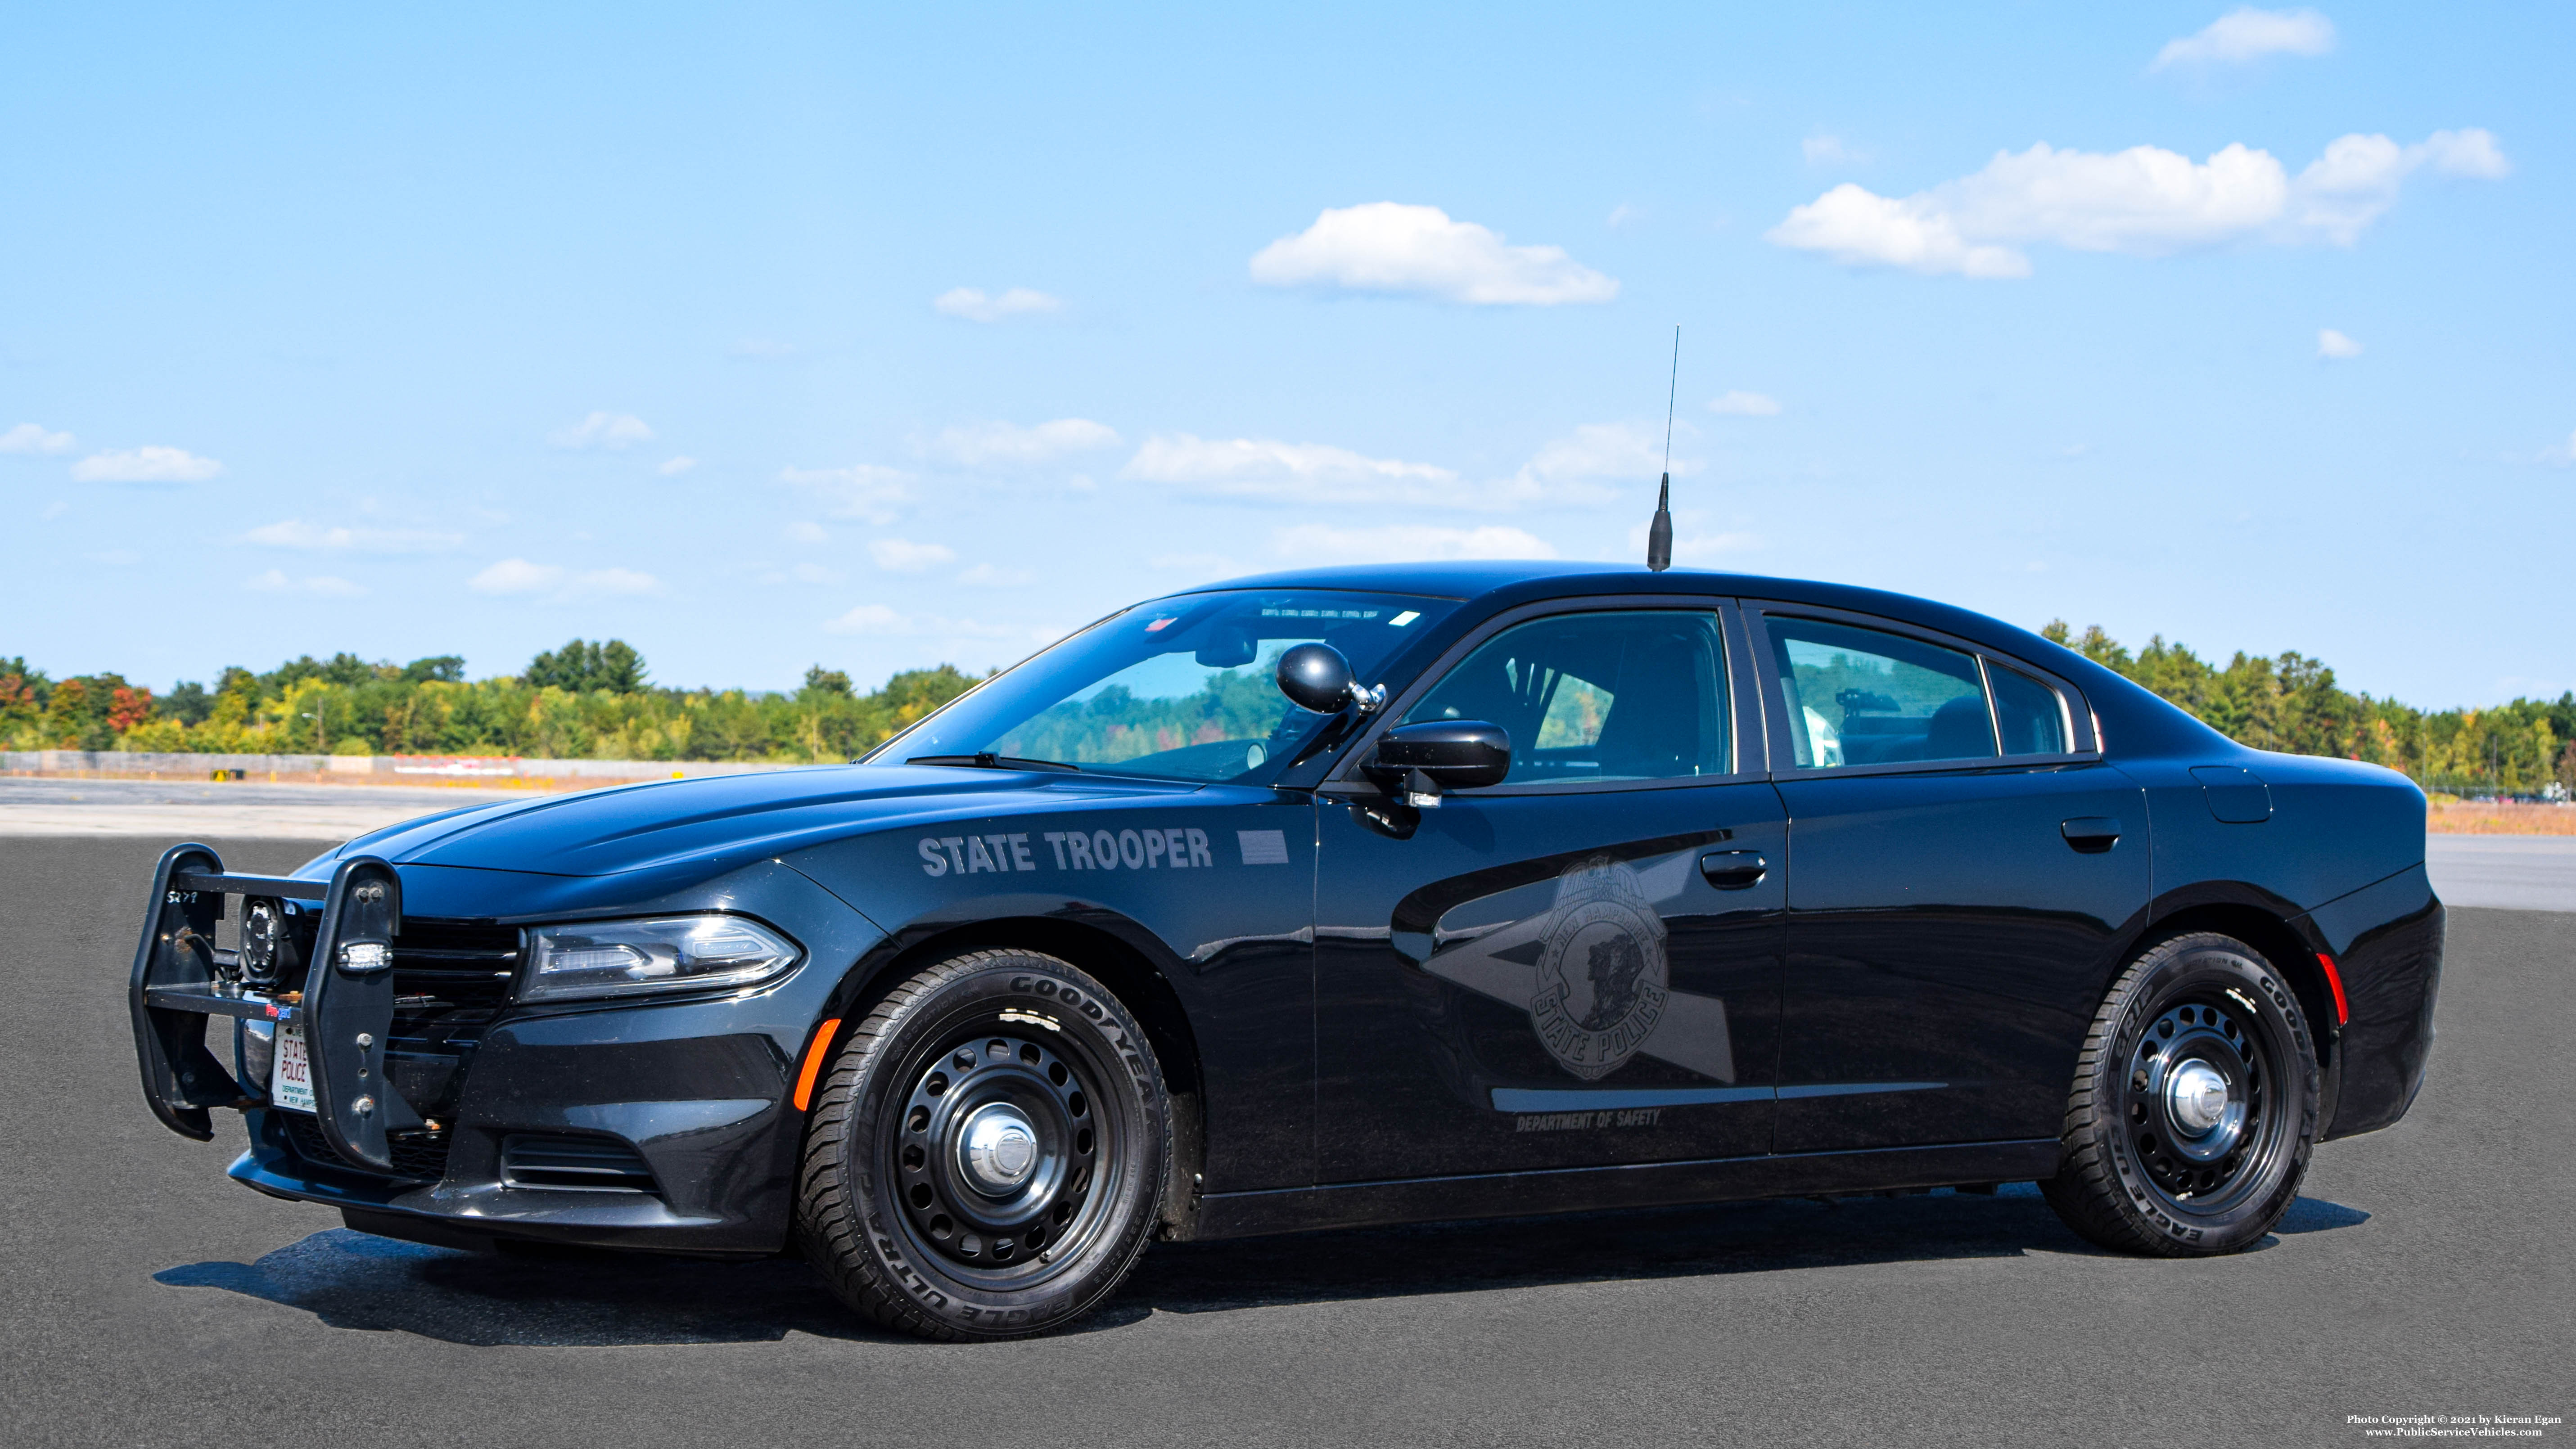 A photo  of New Hampshire State Police
            Cruiser 82, a 2018 Dodge Charger             taken by Kieran Egan